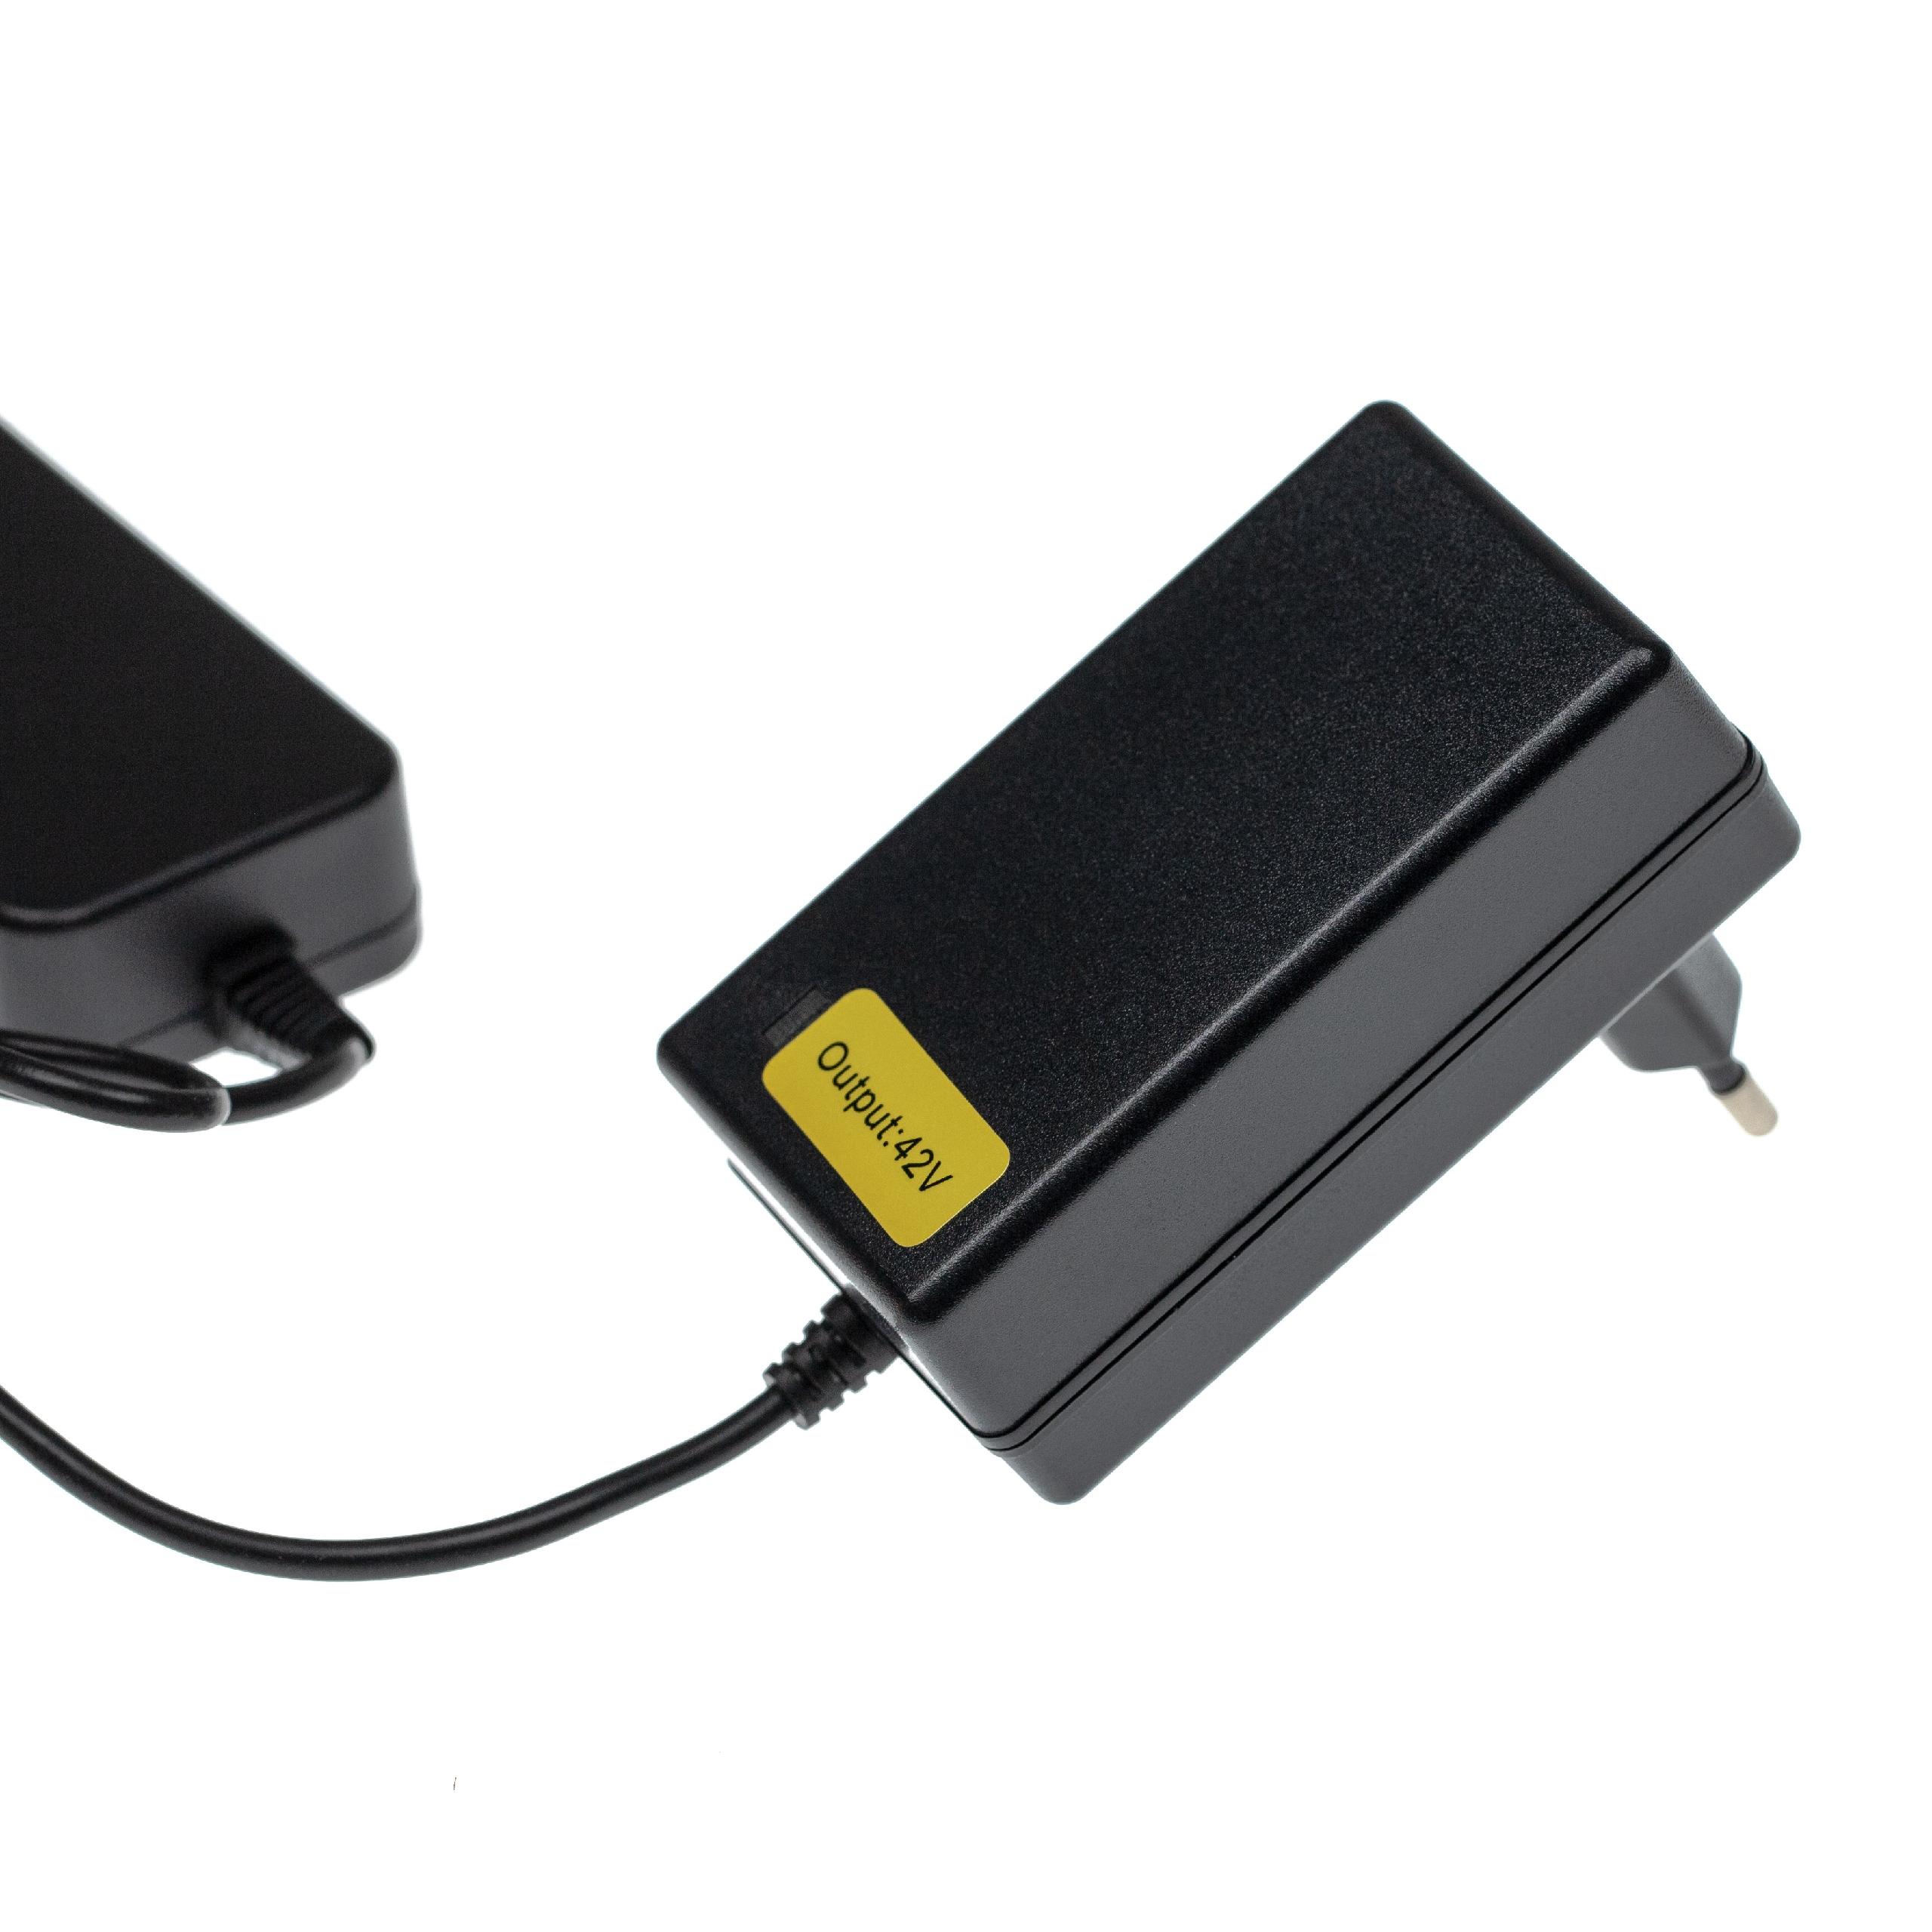 Charger incl. Mains Adapter suitable for B36 , Hilti B36 Power Tool Batteries etc. Li-Ion 36V